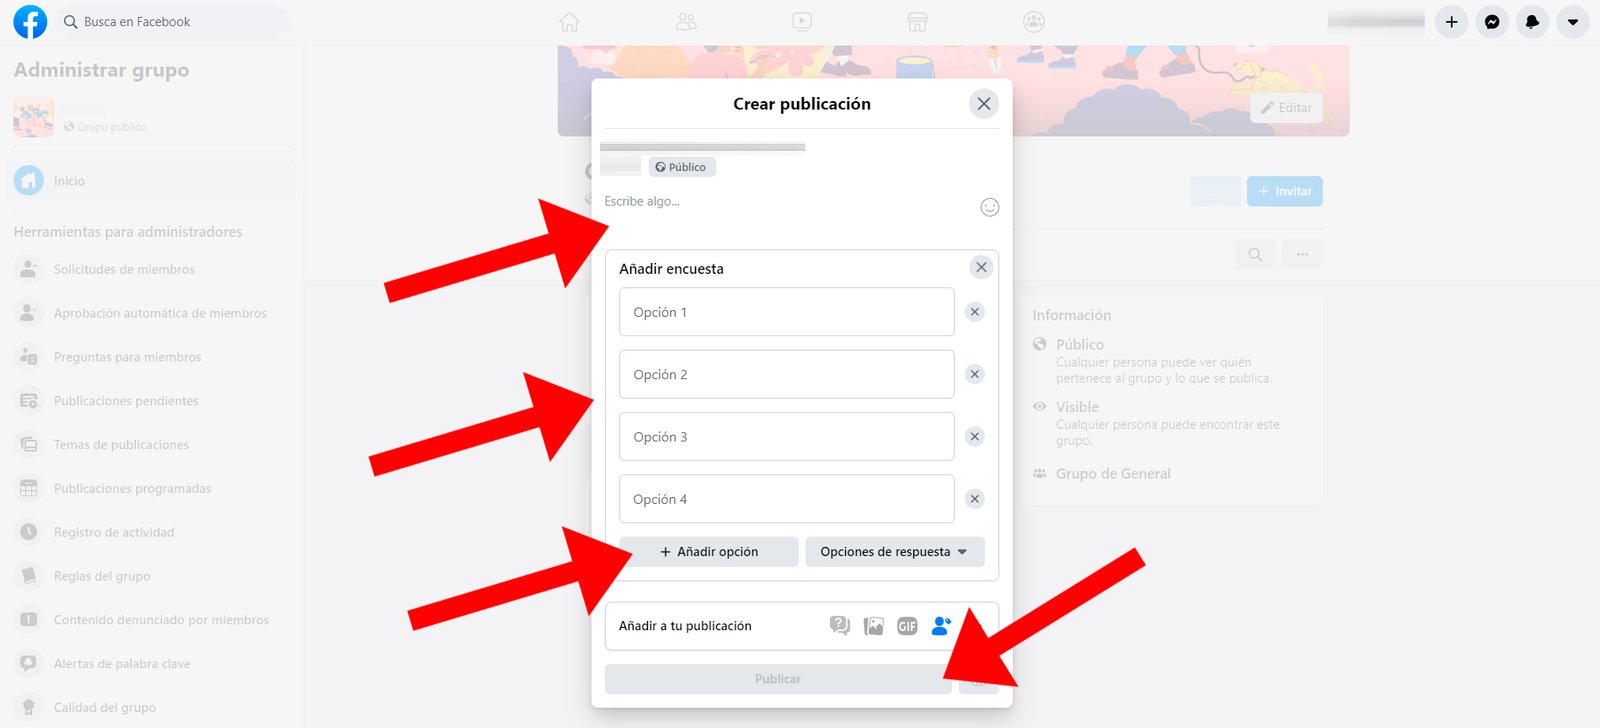 How to make a survey on Facebook